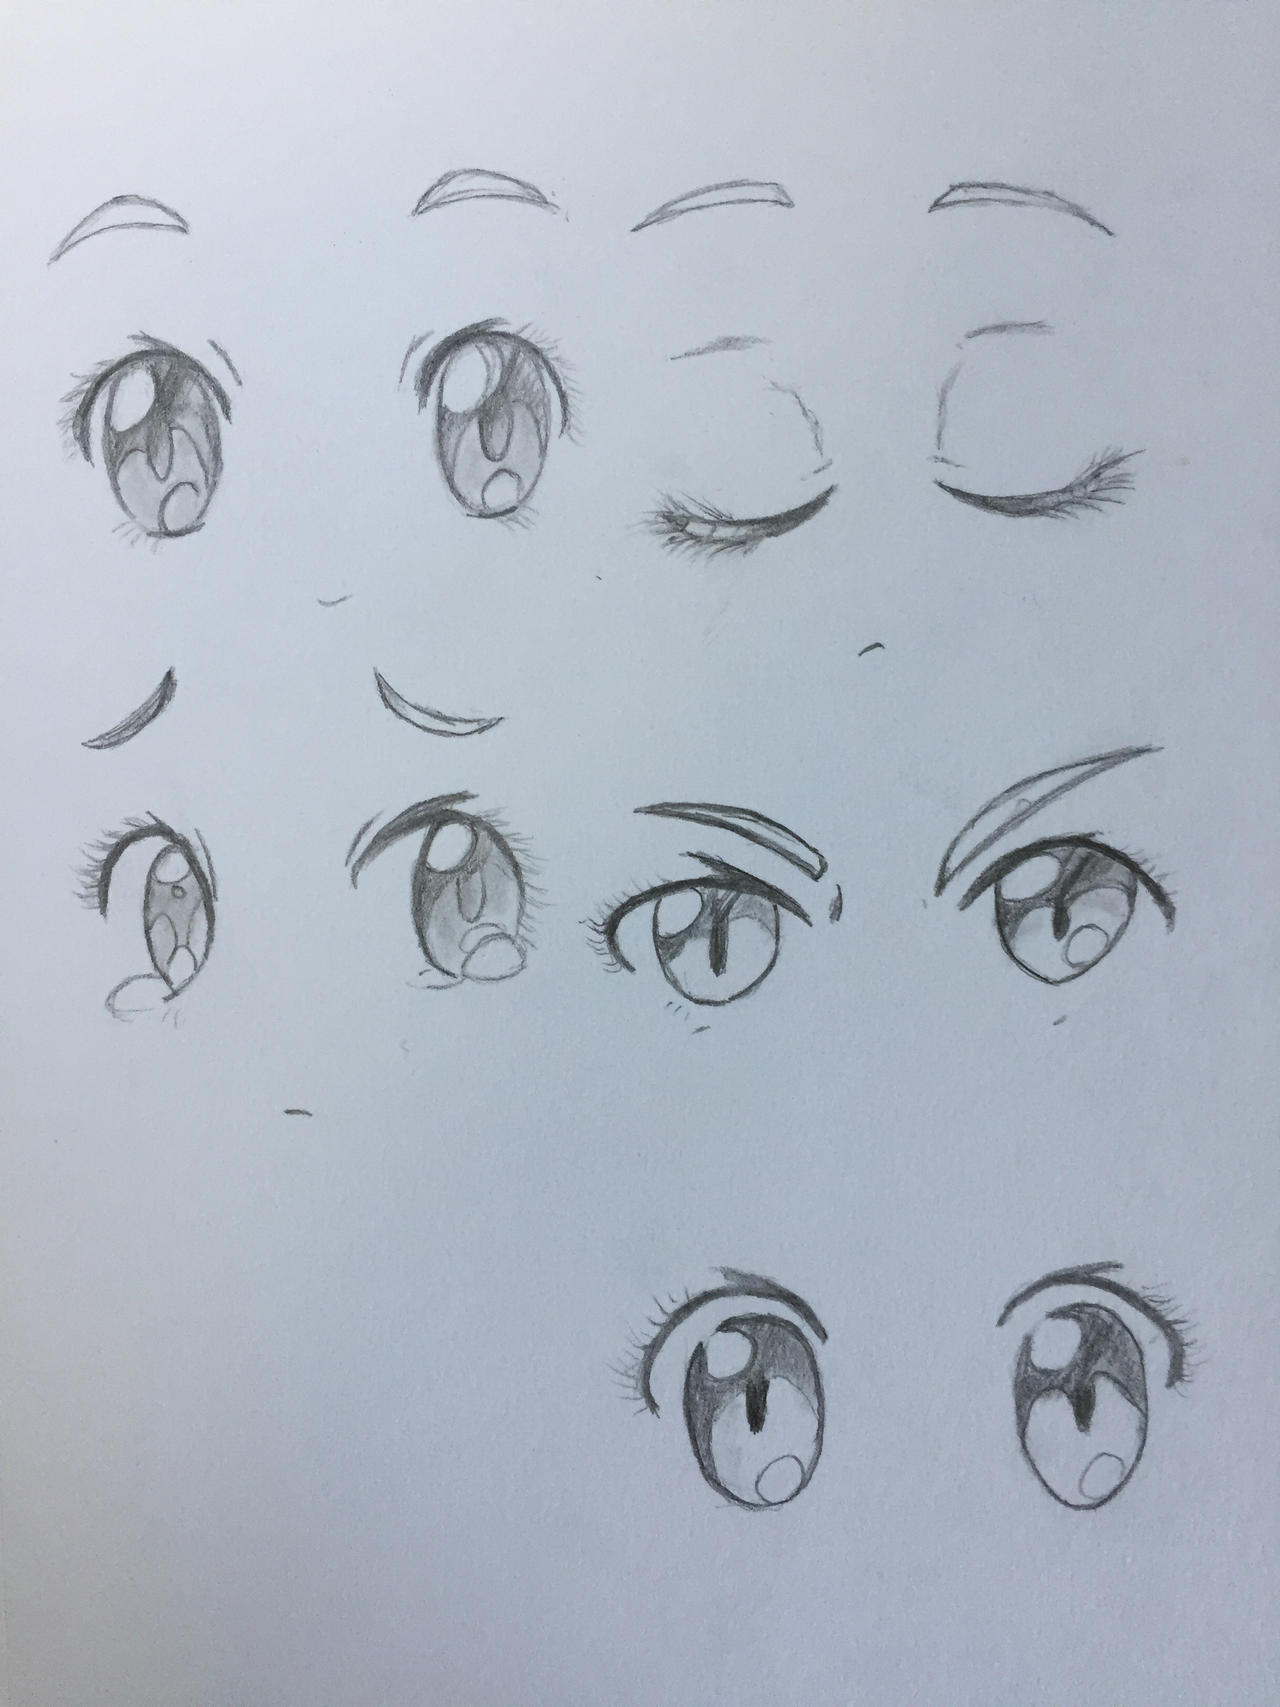 Anime Eyes by I-lOvE-tO-dRaW-aRt on DeviantArt